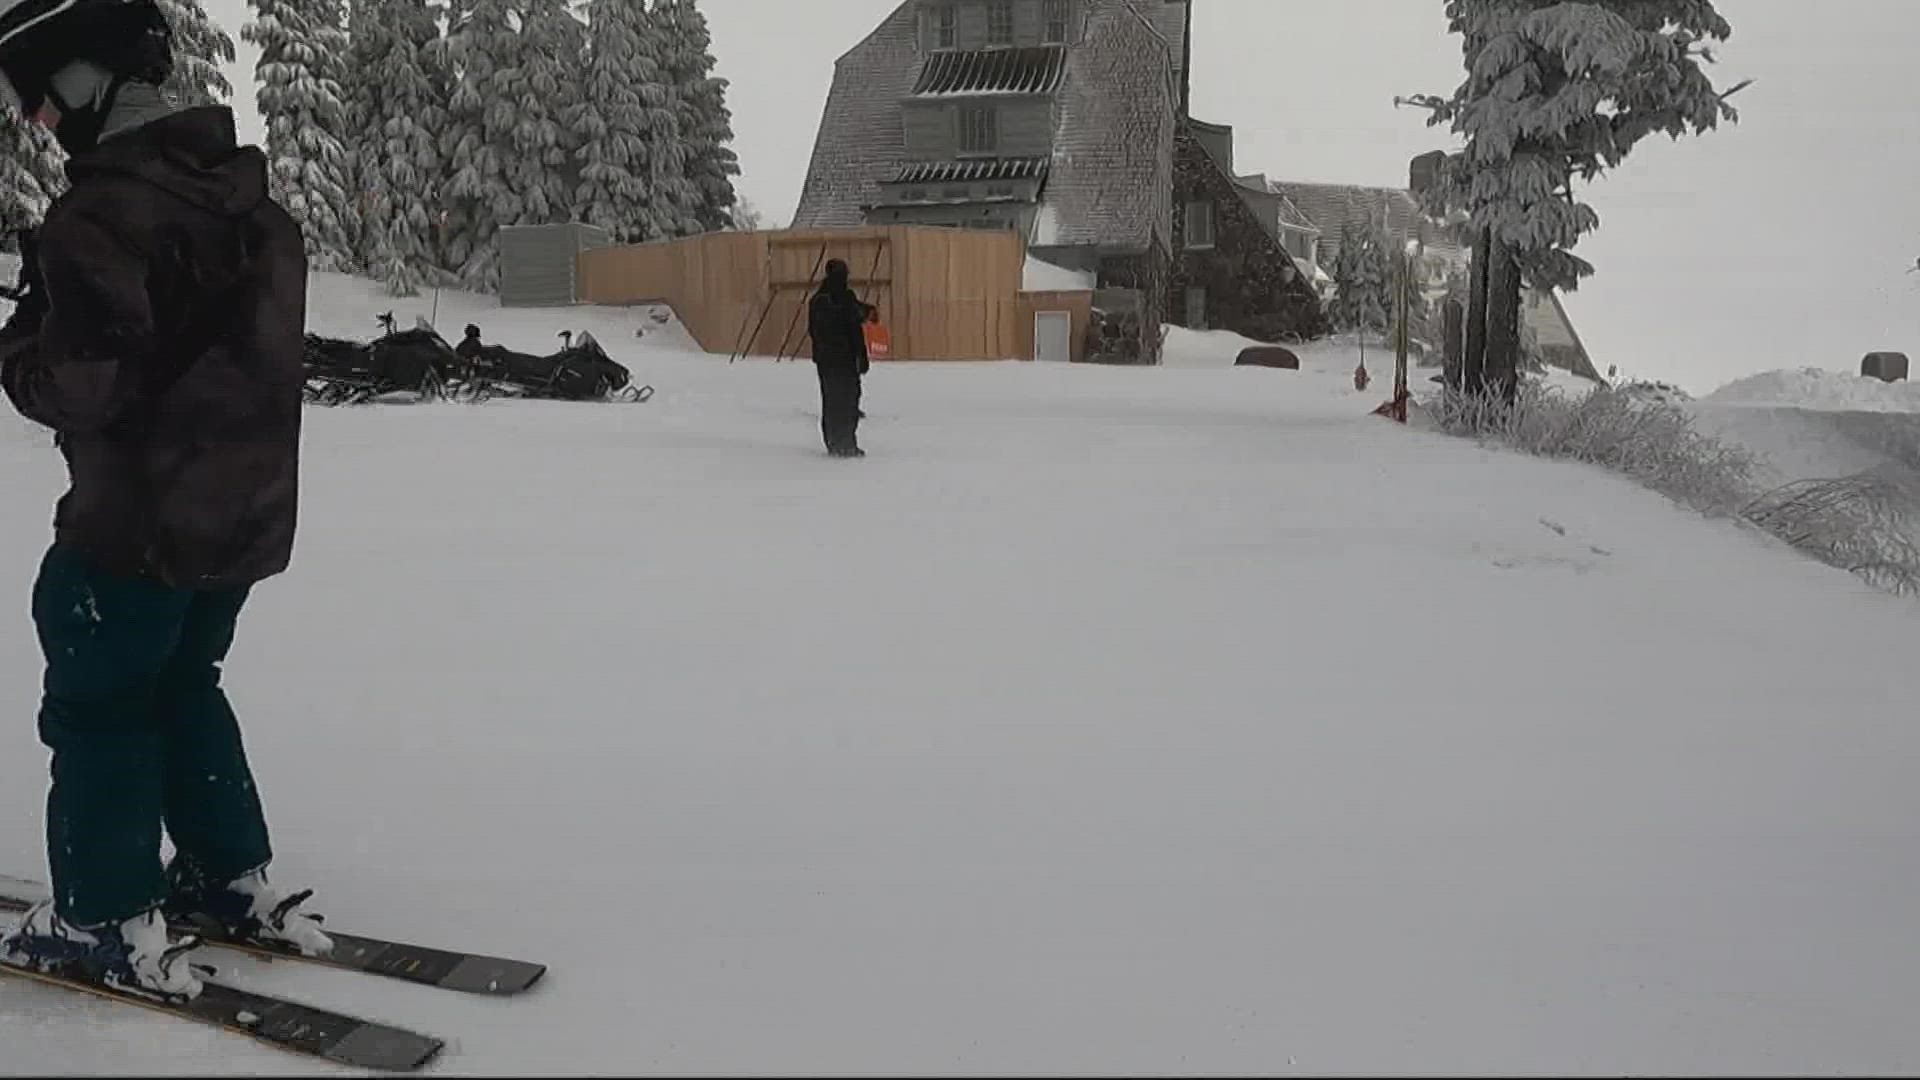 Winter doesn’t officially start for another three weeks, but the mountain passes were already buried over the weekend. Timberline opened two ski lifts on Monday.